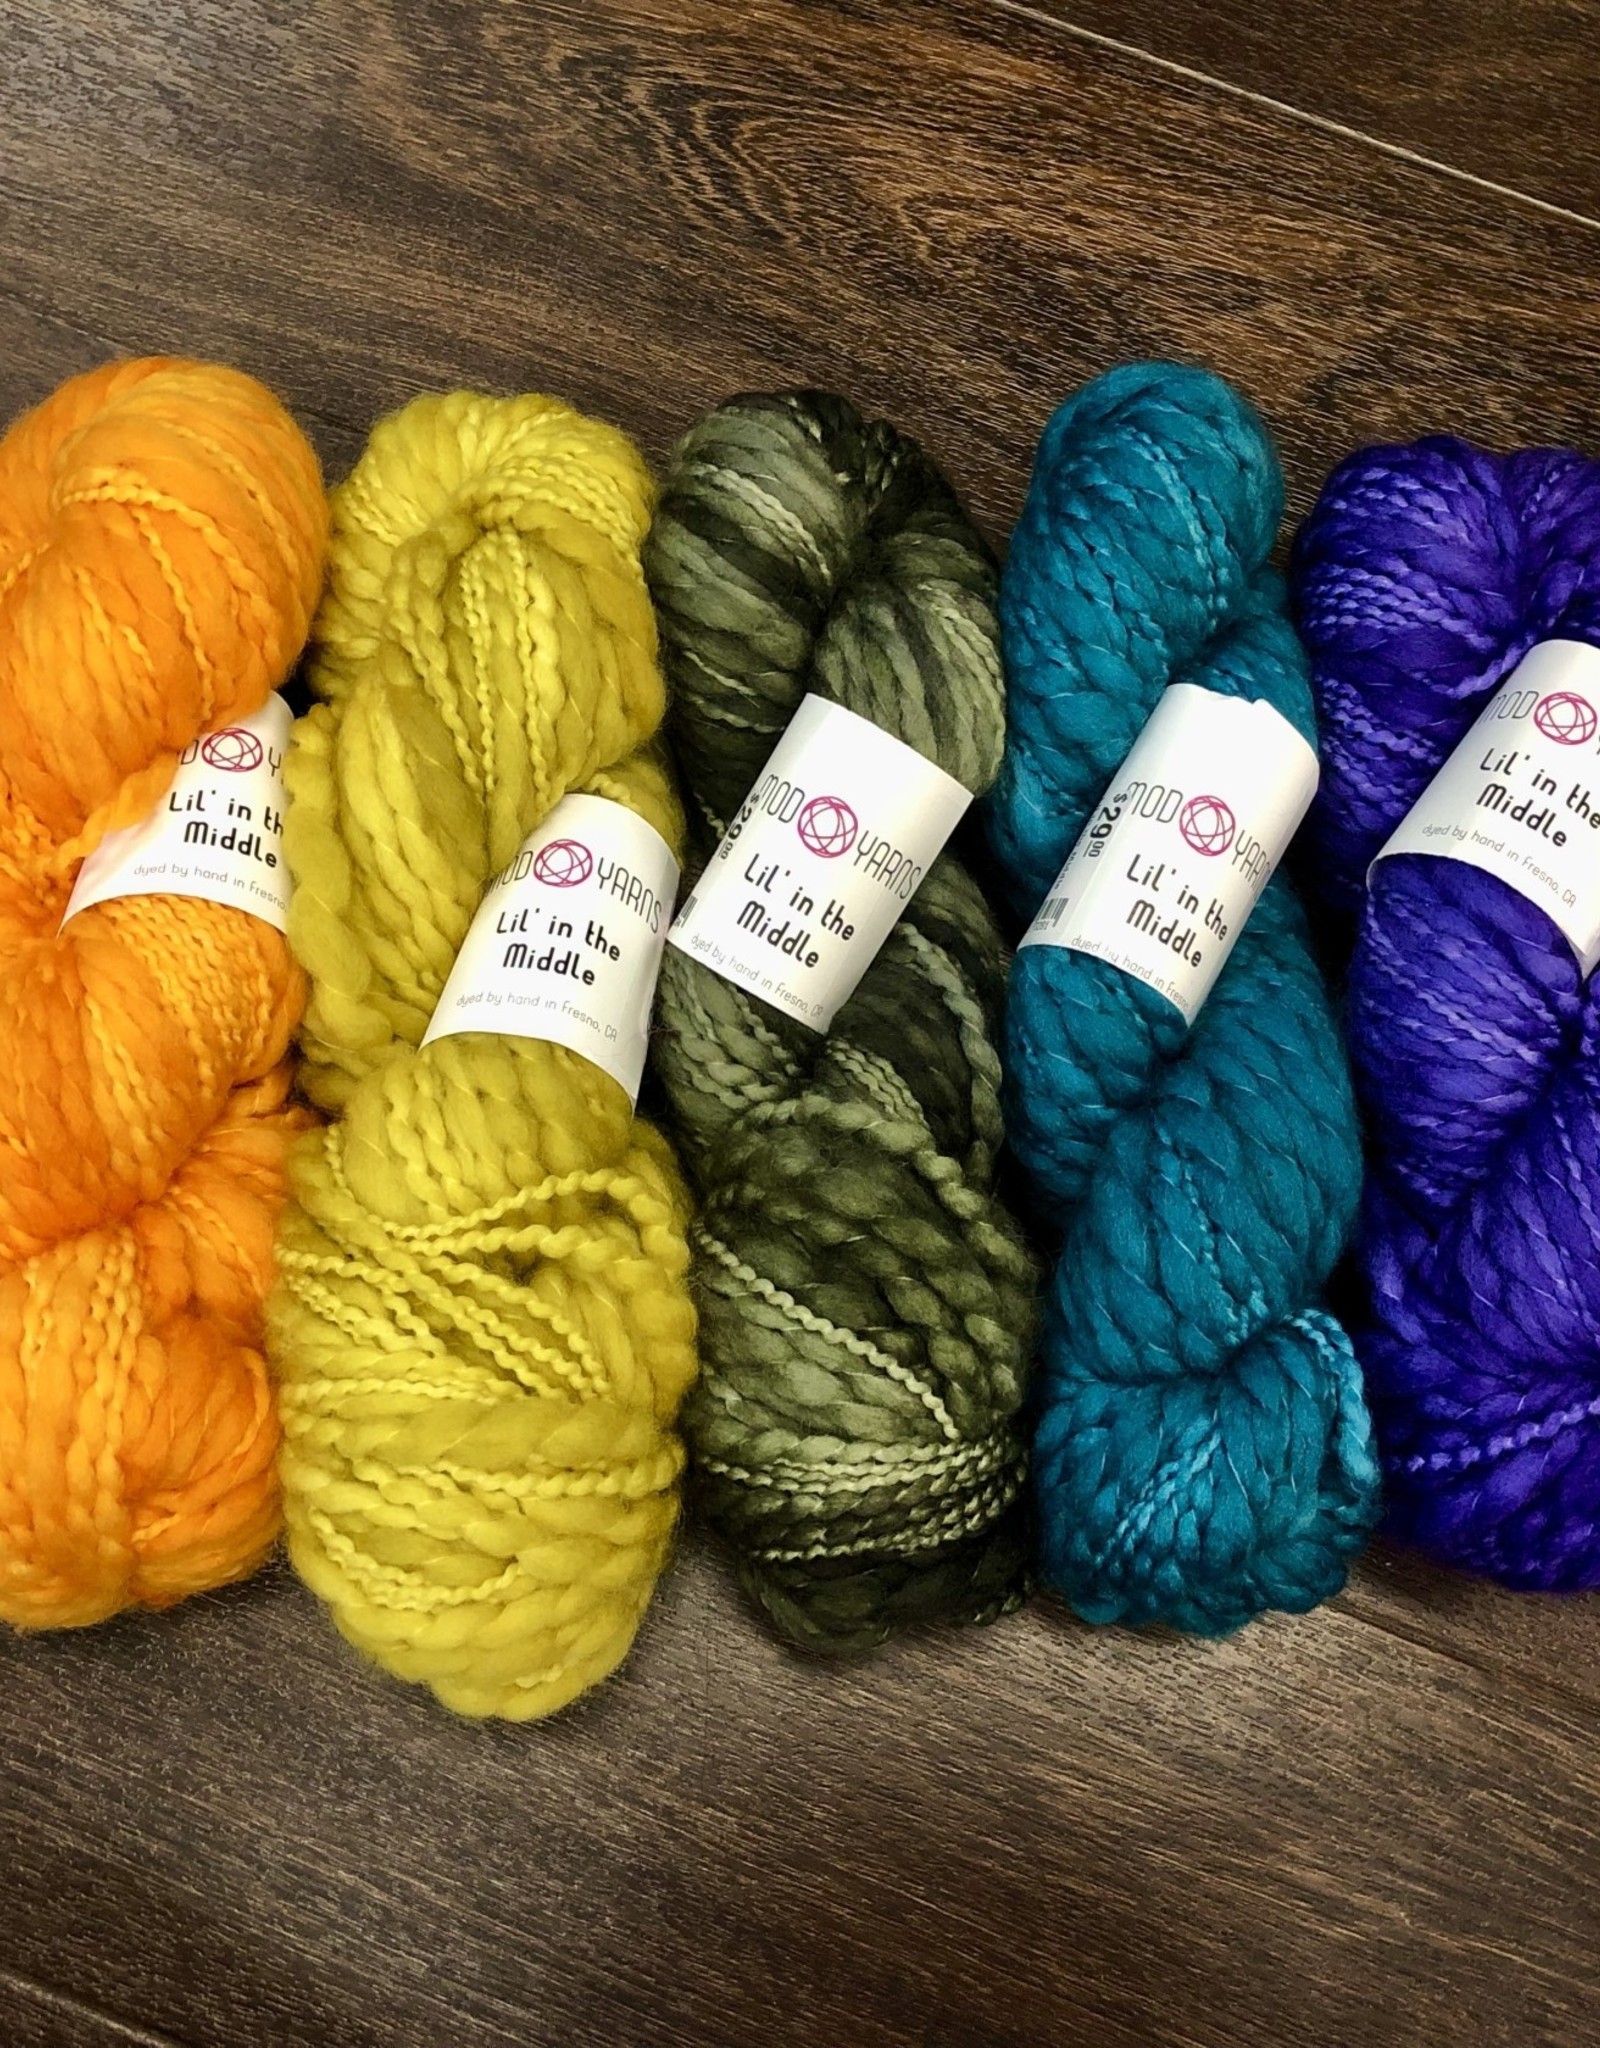 Mod Yarns Lil in the Middle by Mod Yarns